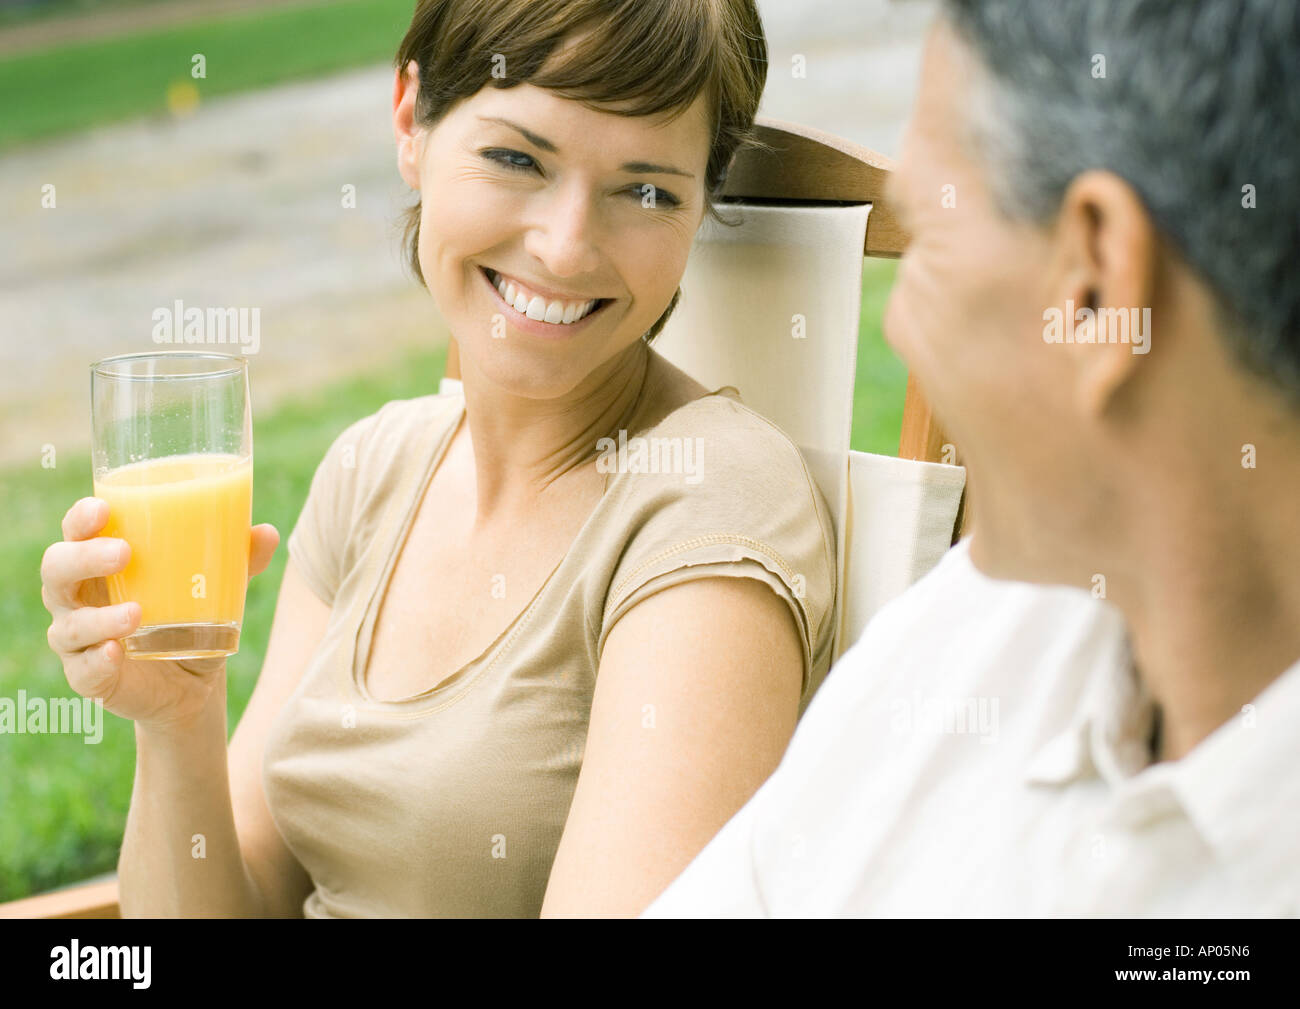 Woman holding glass of orange juice, looking at husband Stock Photo